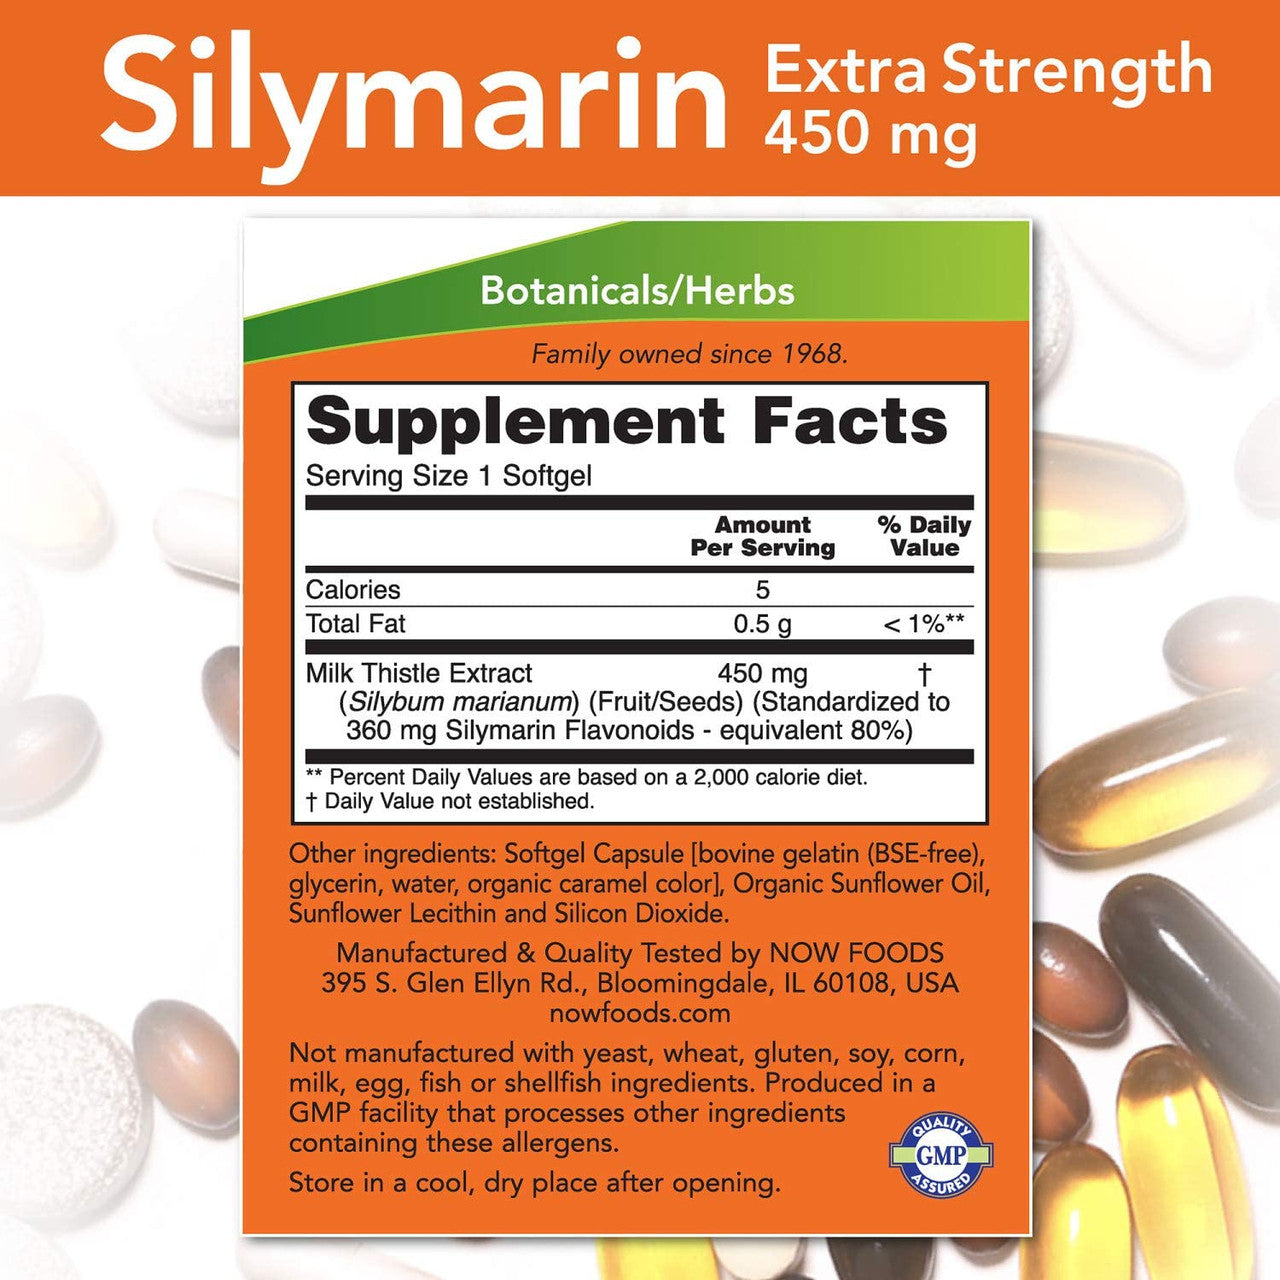 Now Extra Strength Silymarin 450 mg supplement facts